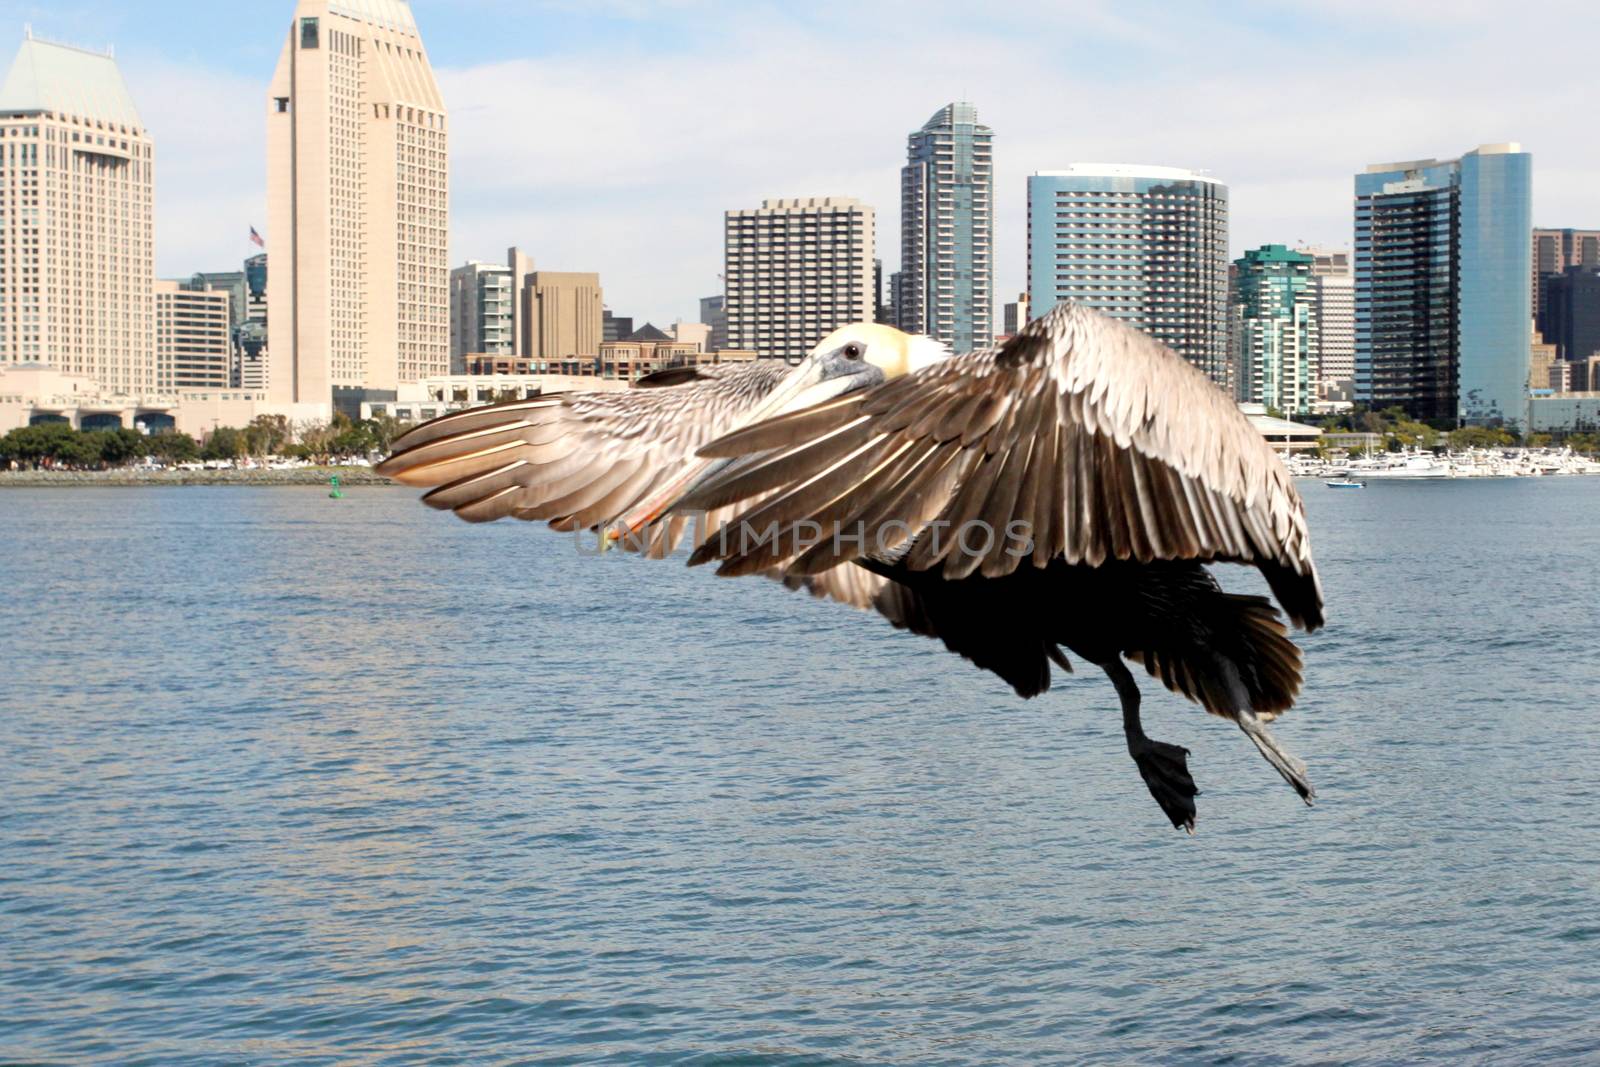 Grey pacific pelican with blue sky and the skyline of San Diego in the background.